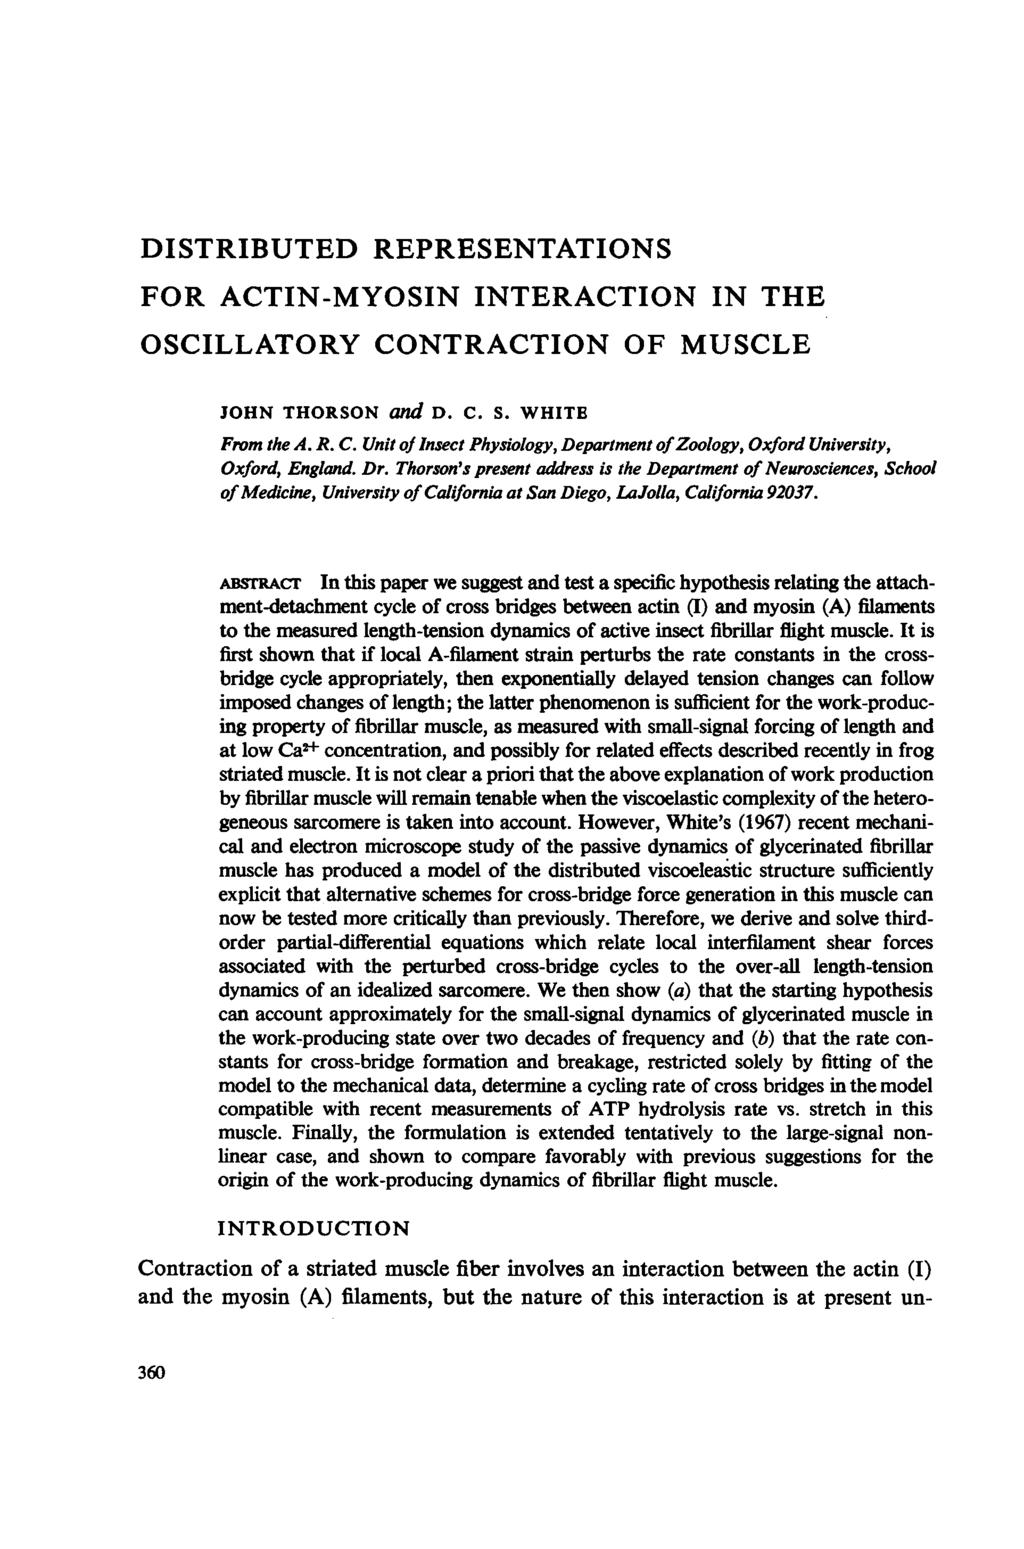 DISTRIBUTED REPRESENTATIONS FOR ACTIN-MYOSIN INTERACTION IN THE OSCILLATORY CONTRACTION OF MUSCLE JOHN THORSON and D. C. S. WHITE From the A. R. C. Unit of Insect Physiology, Department ofzoology, Oxford University, Oxford, England Dr.